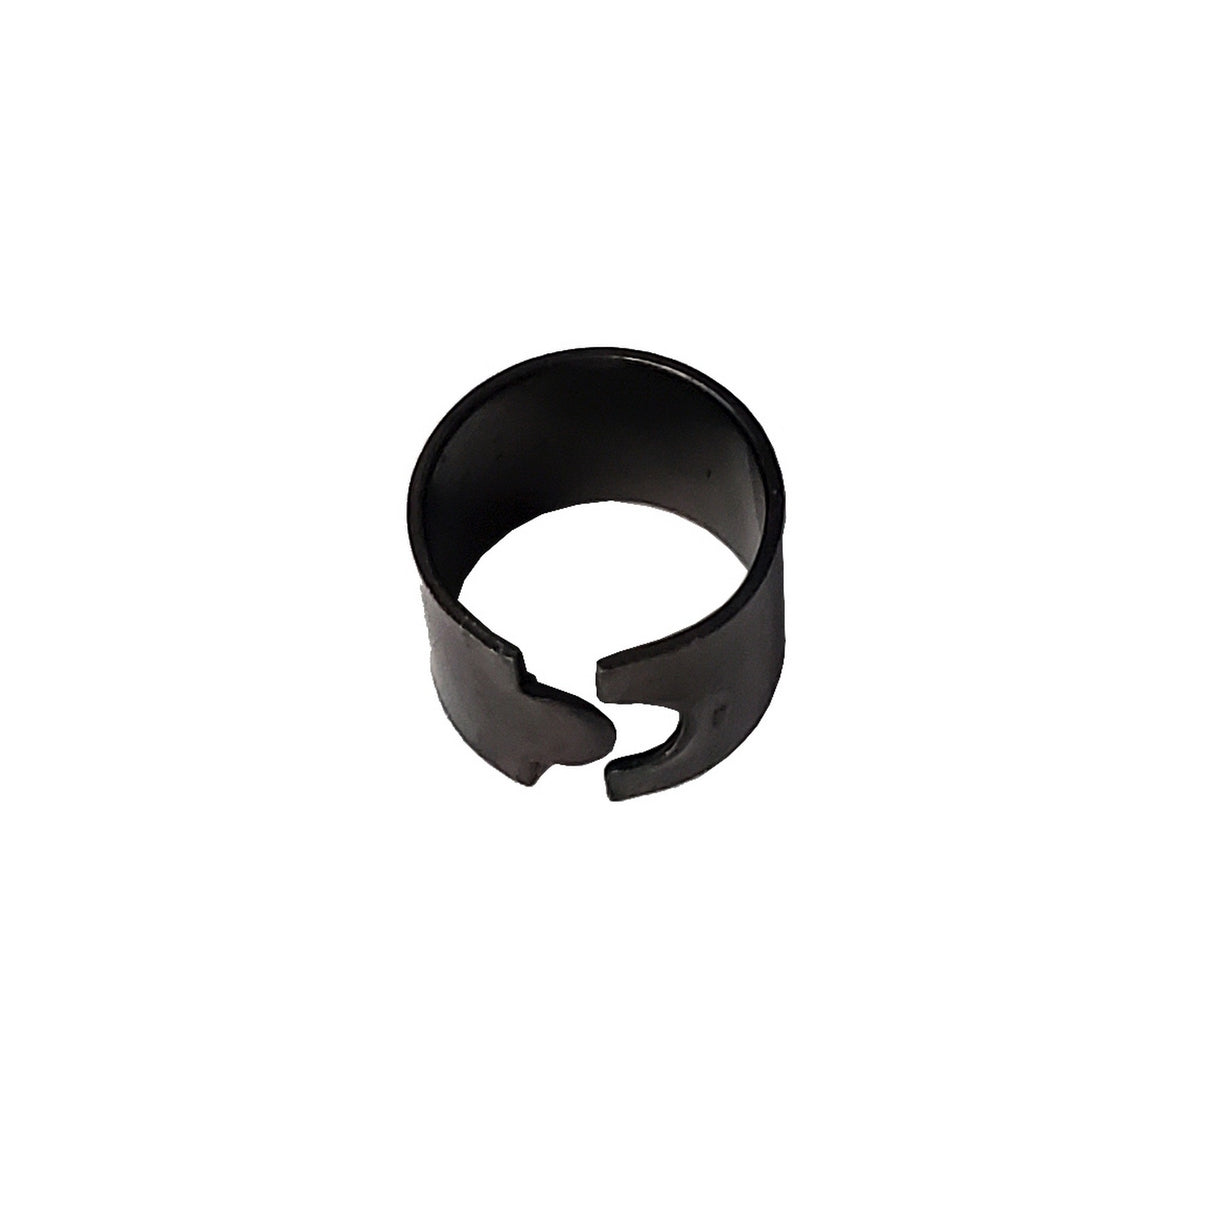 Clear-Com 280494Z Compression Ring, for 251275Z and 355G086 for HMS-4X, HRM-4X, HKB-2X